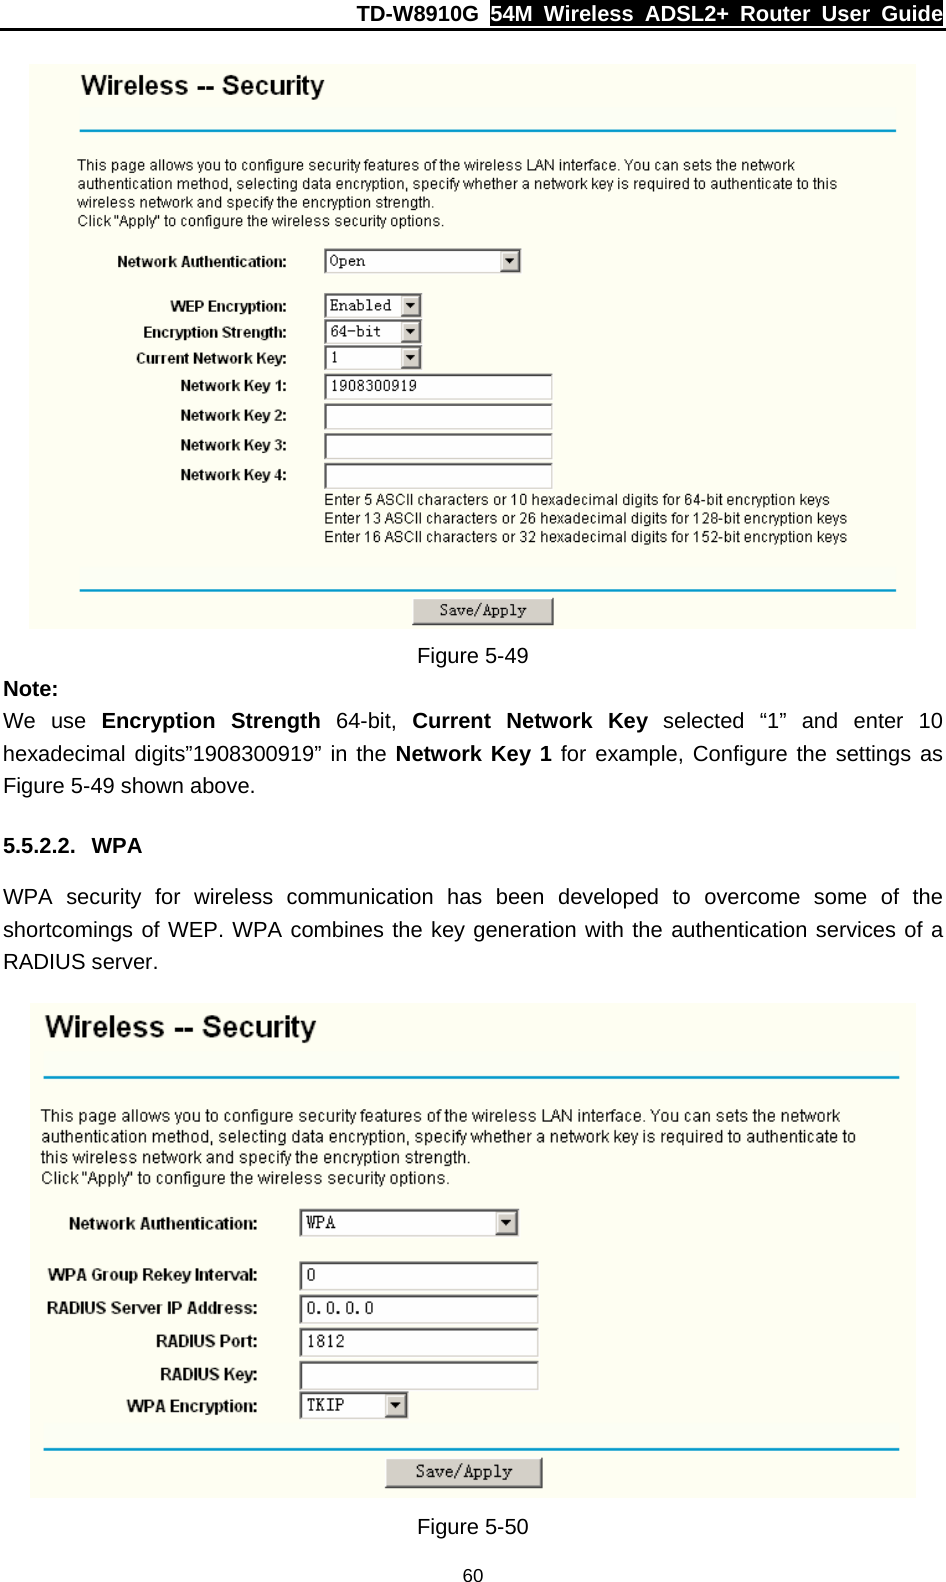 TD-W8910G  54M Wireless ADSL2+ Router User Guide  60 Figure 5-49 Note: We use Encryption Strength 64-bit, Current Network Key  selected “1” and enter 10 hexadecimal digits”1908300919” in the Network Key 1 for example, Configure the settings as Figure 5-49 shown above. 5.5.2.2. WPA WPA security for wireless communication has been developed to overcome some of the shortcomings of WEP. WPA combines the key generation with the authentication services of a RADIUS server.  Figure 5-50 